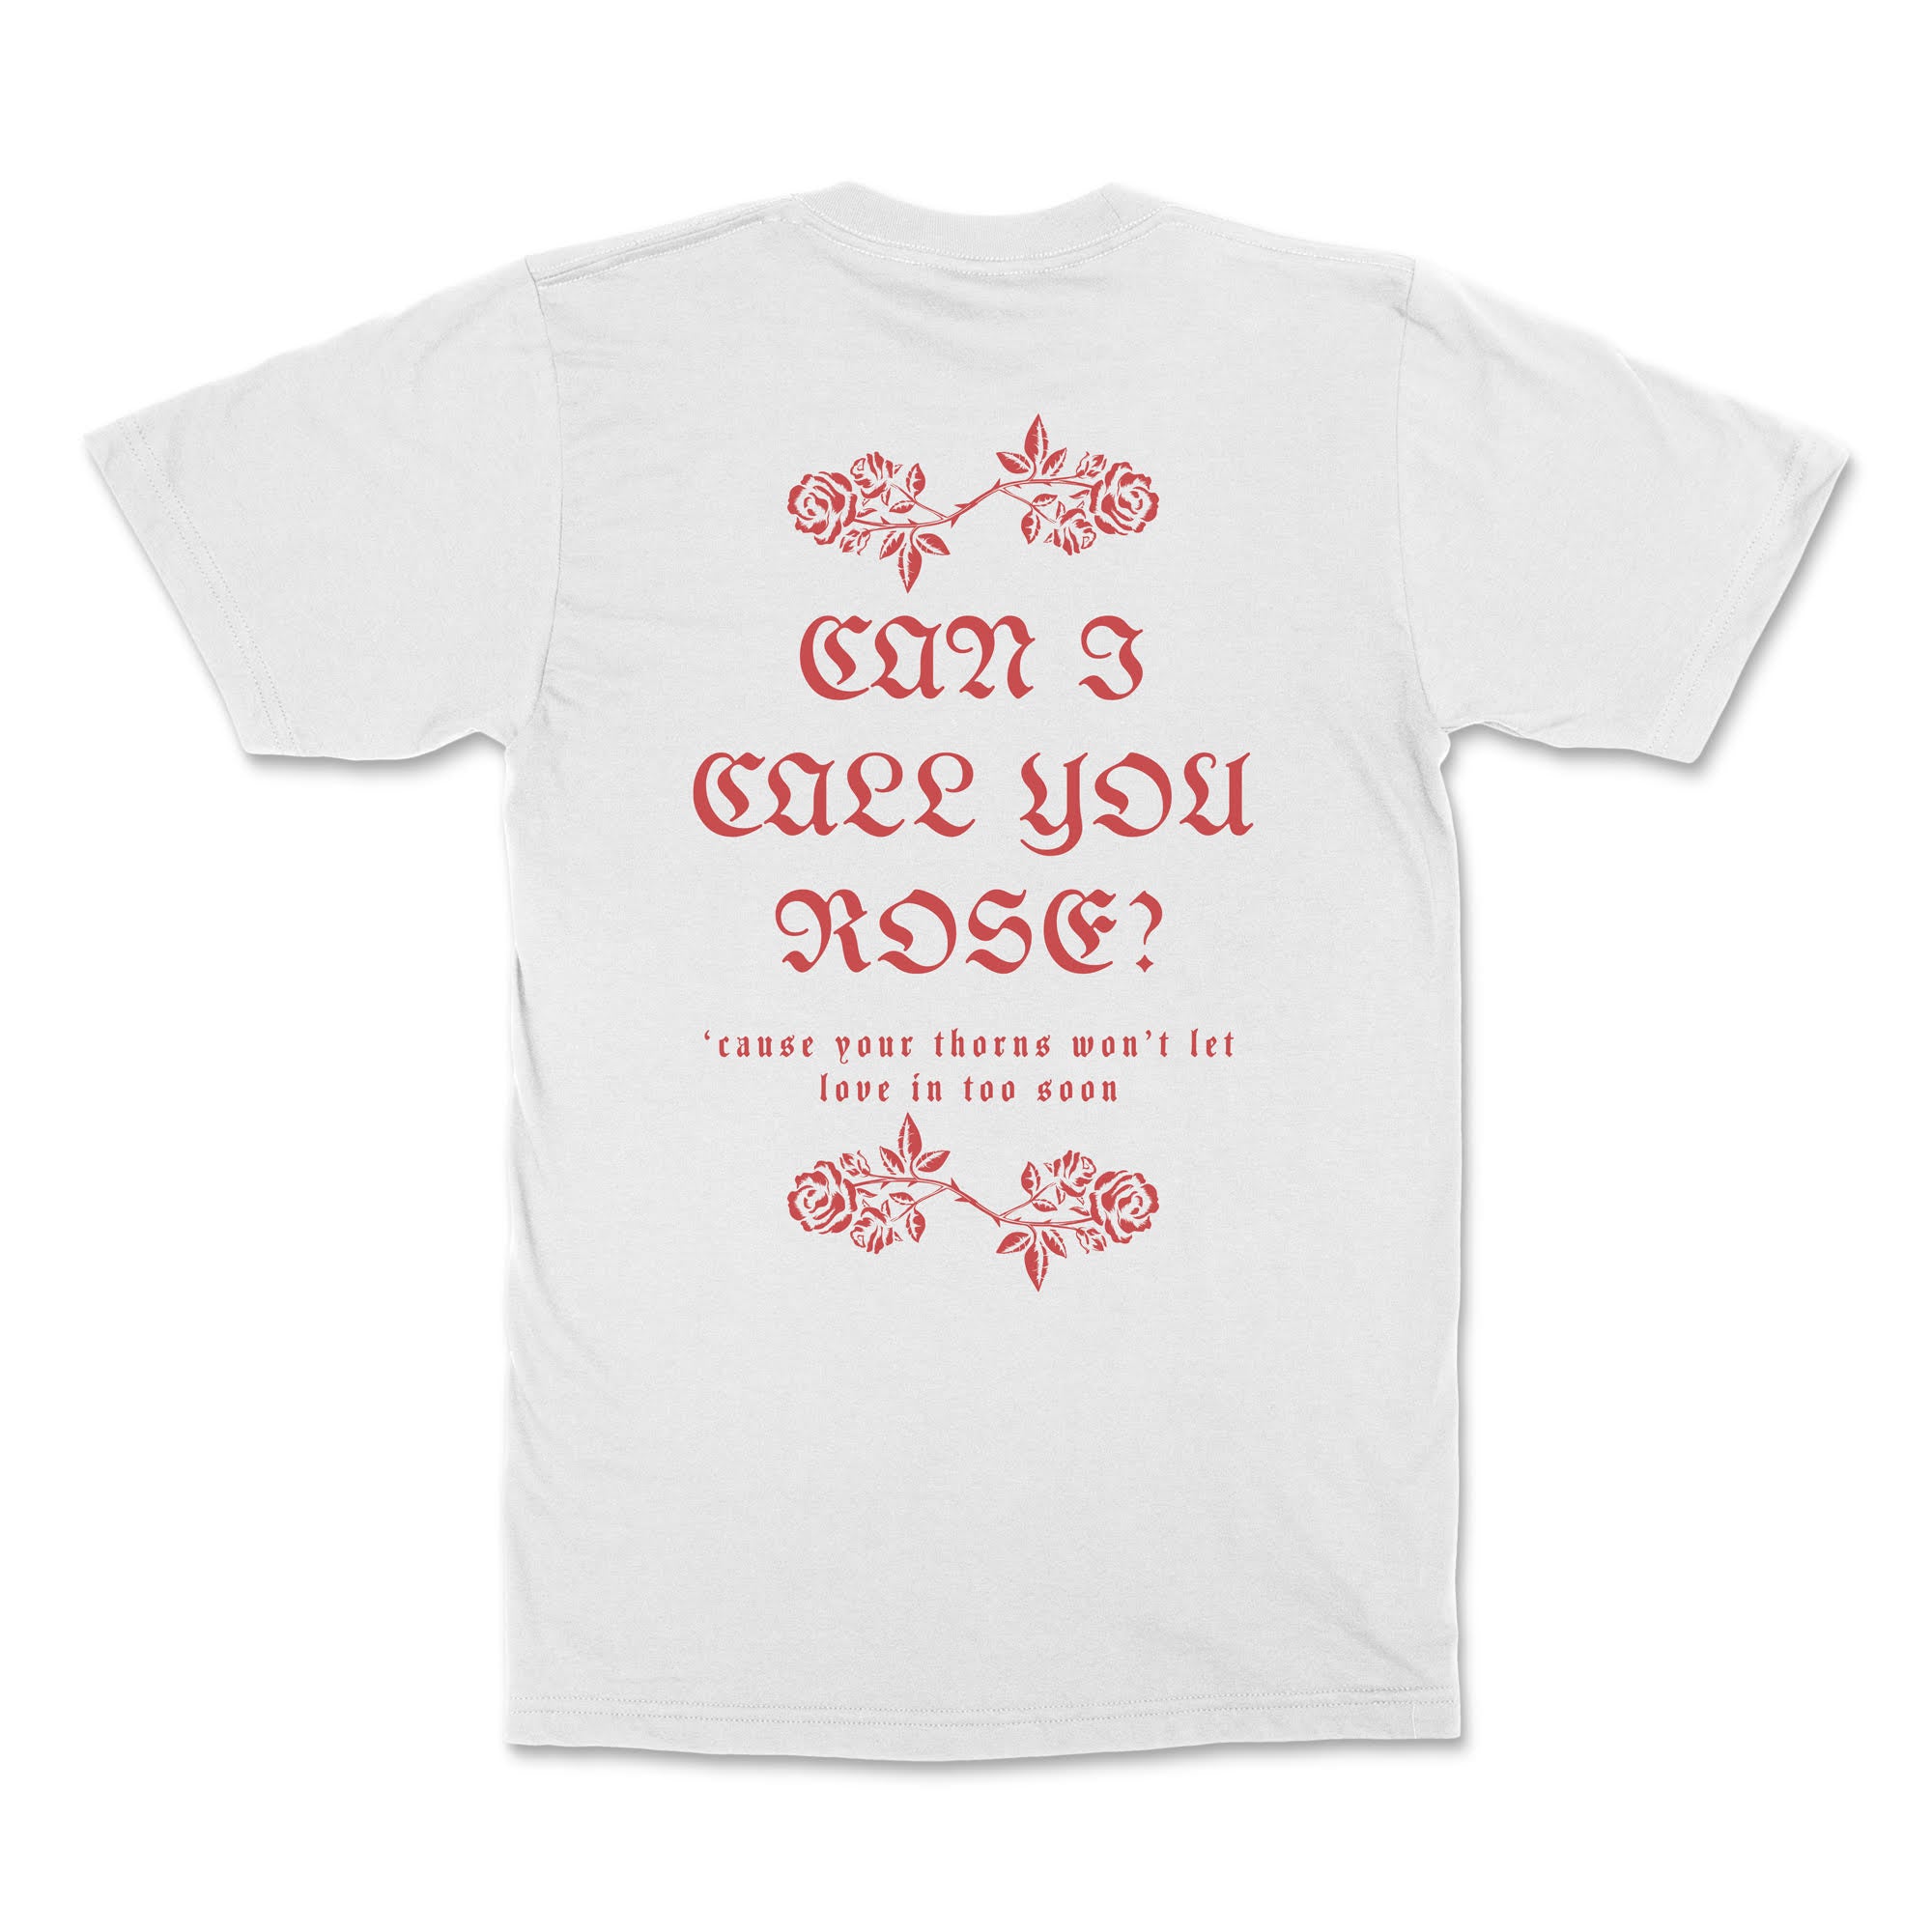 Thee Sacred Souls "Rose" T-shirt